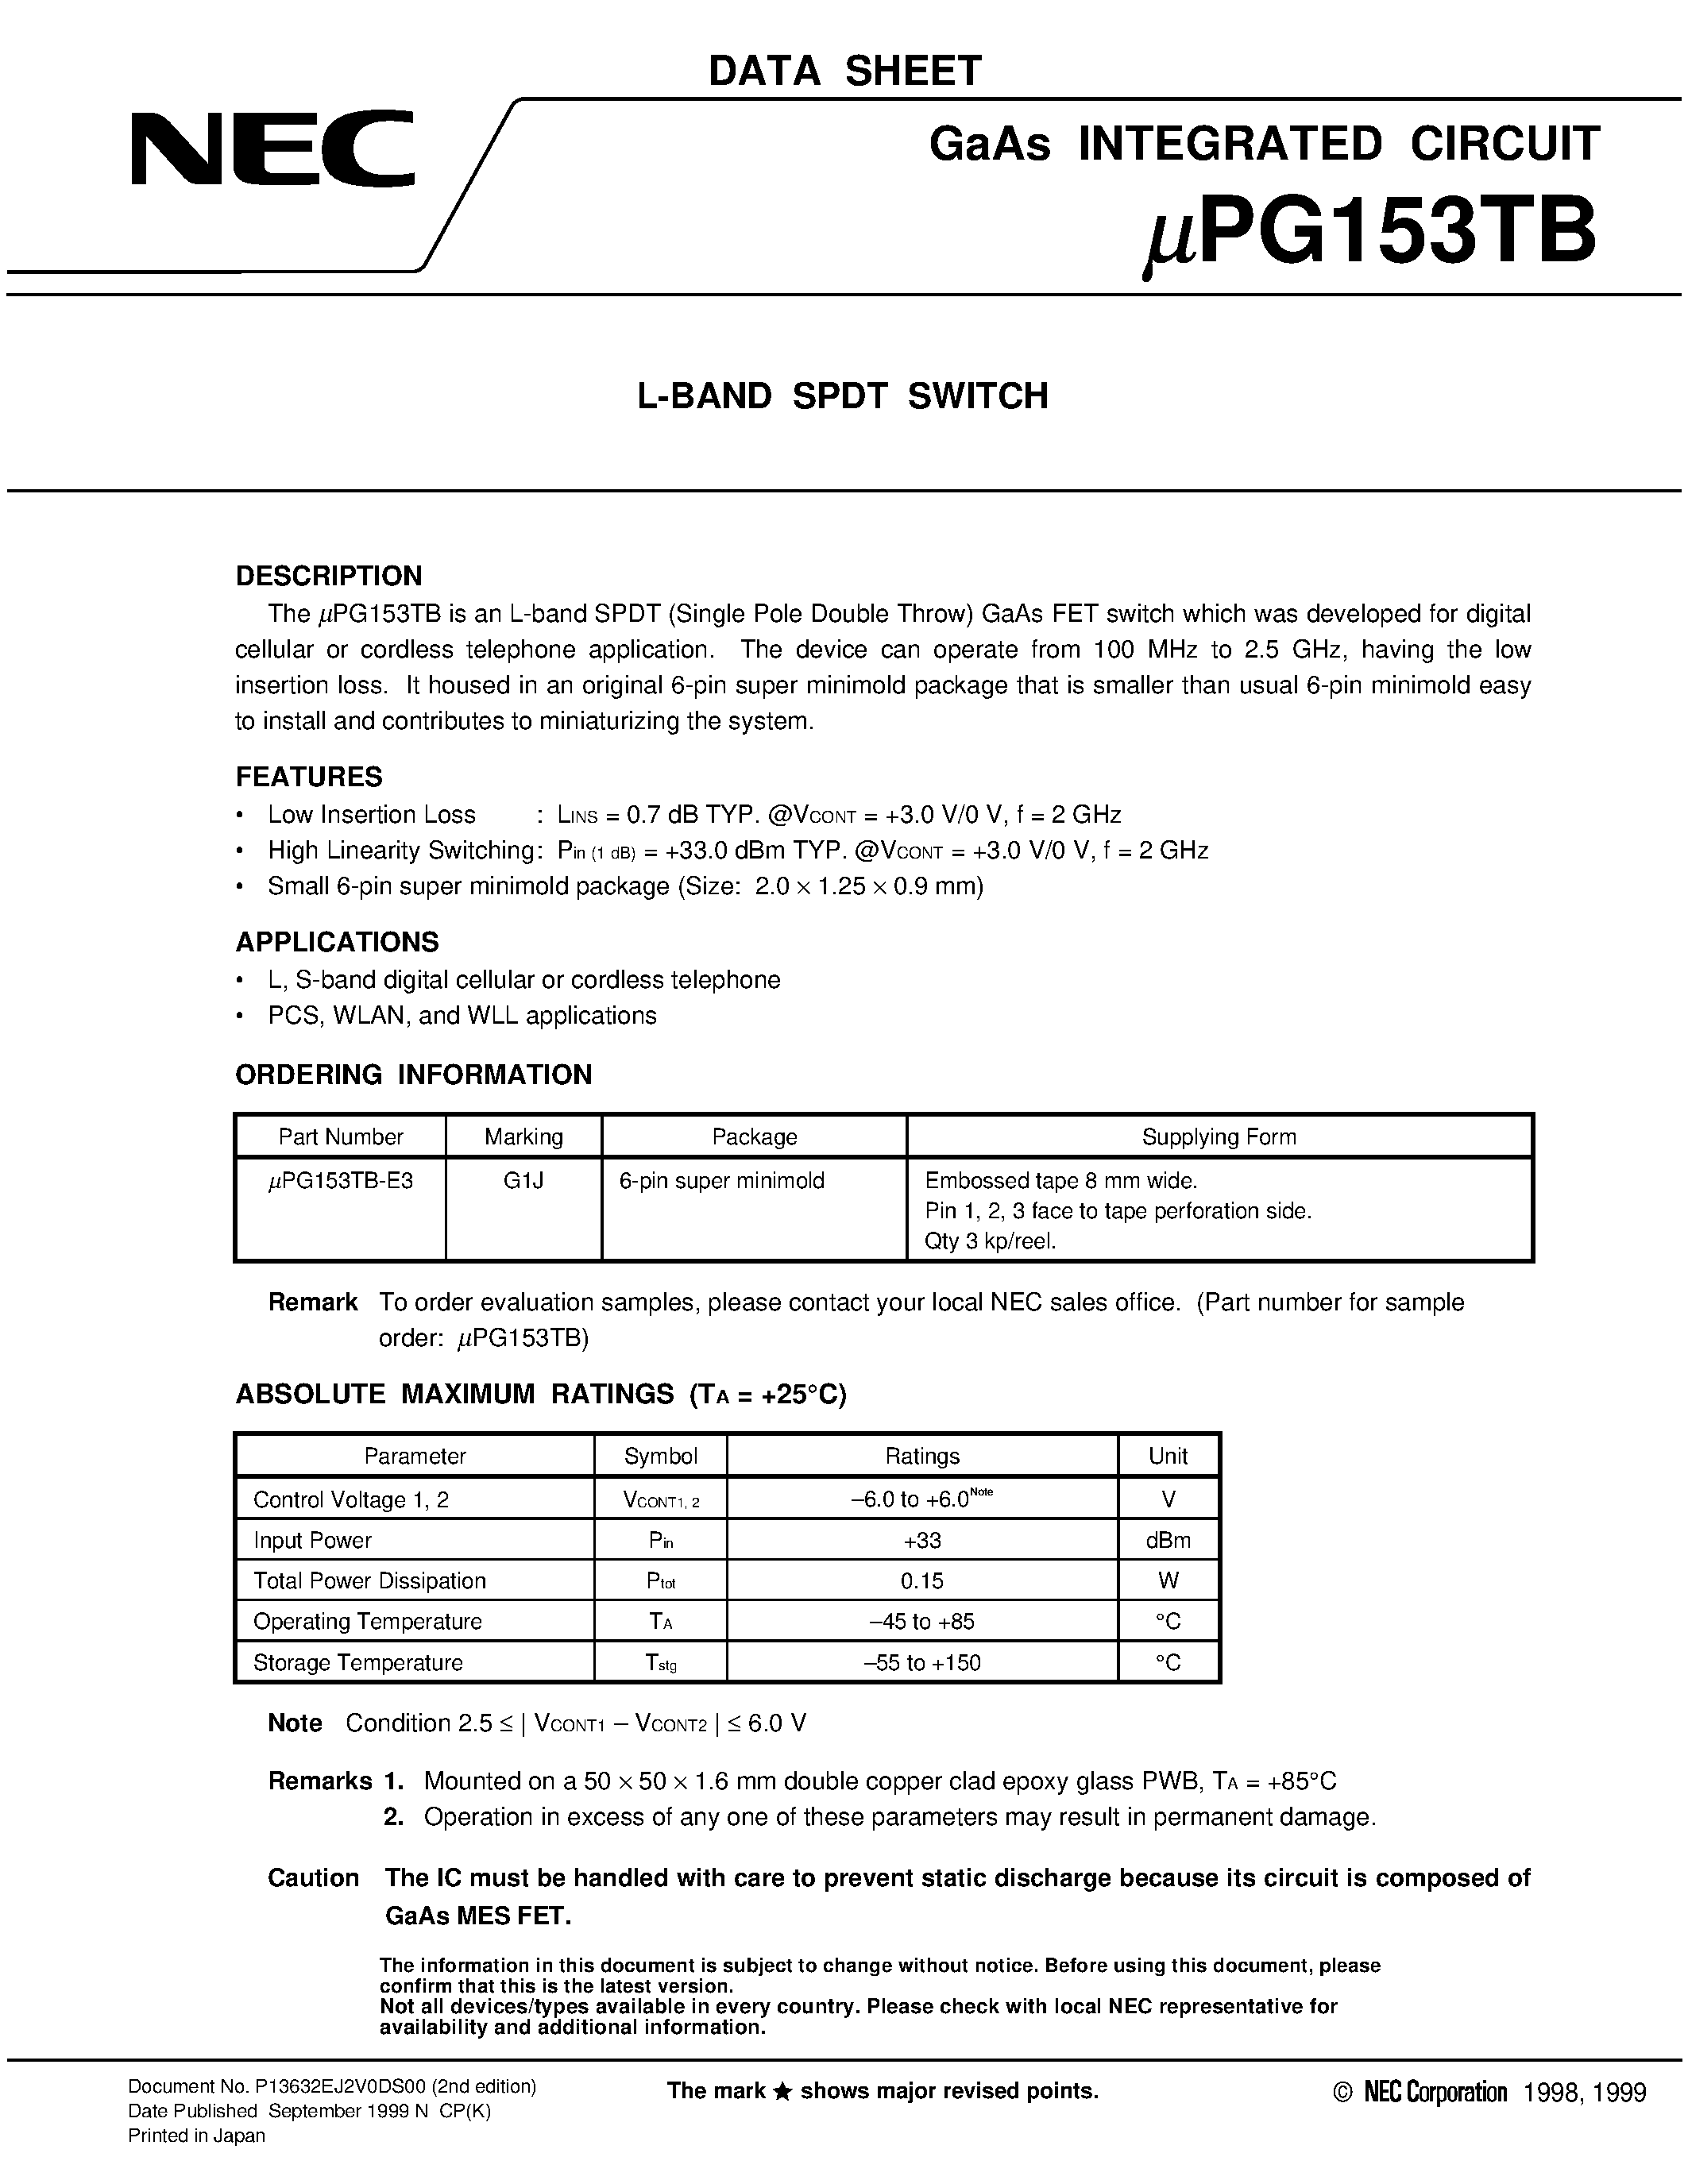 Datasheet UPG153TB-E3 - L-BAND SPDT SWITCH page 1